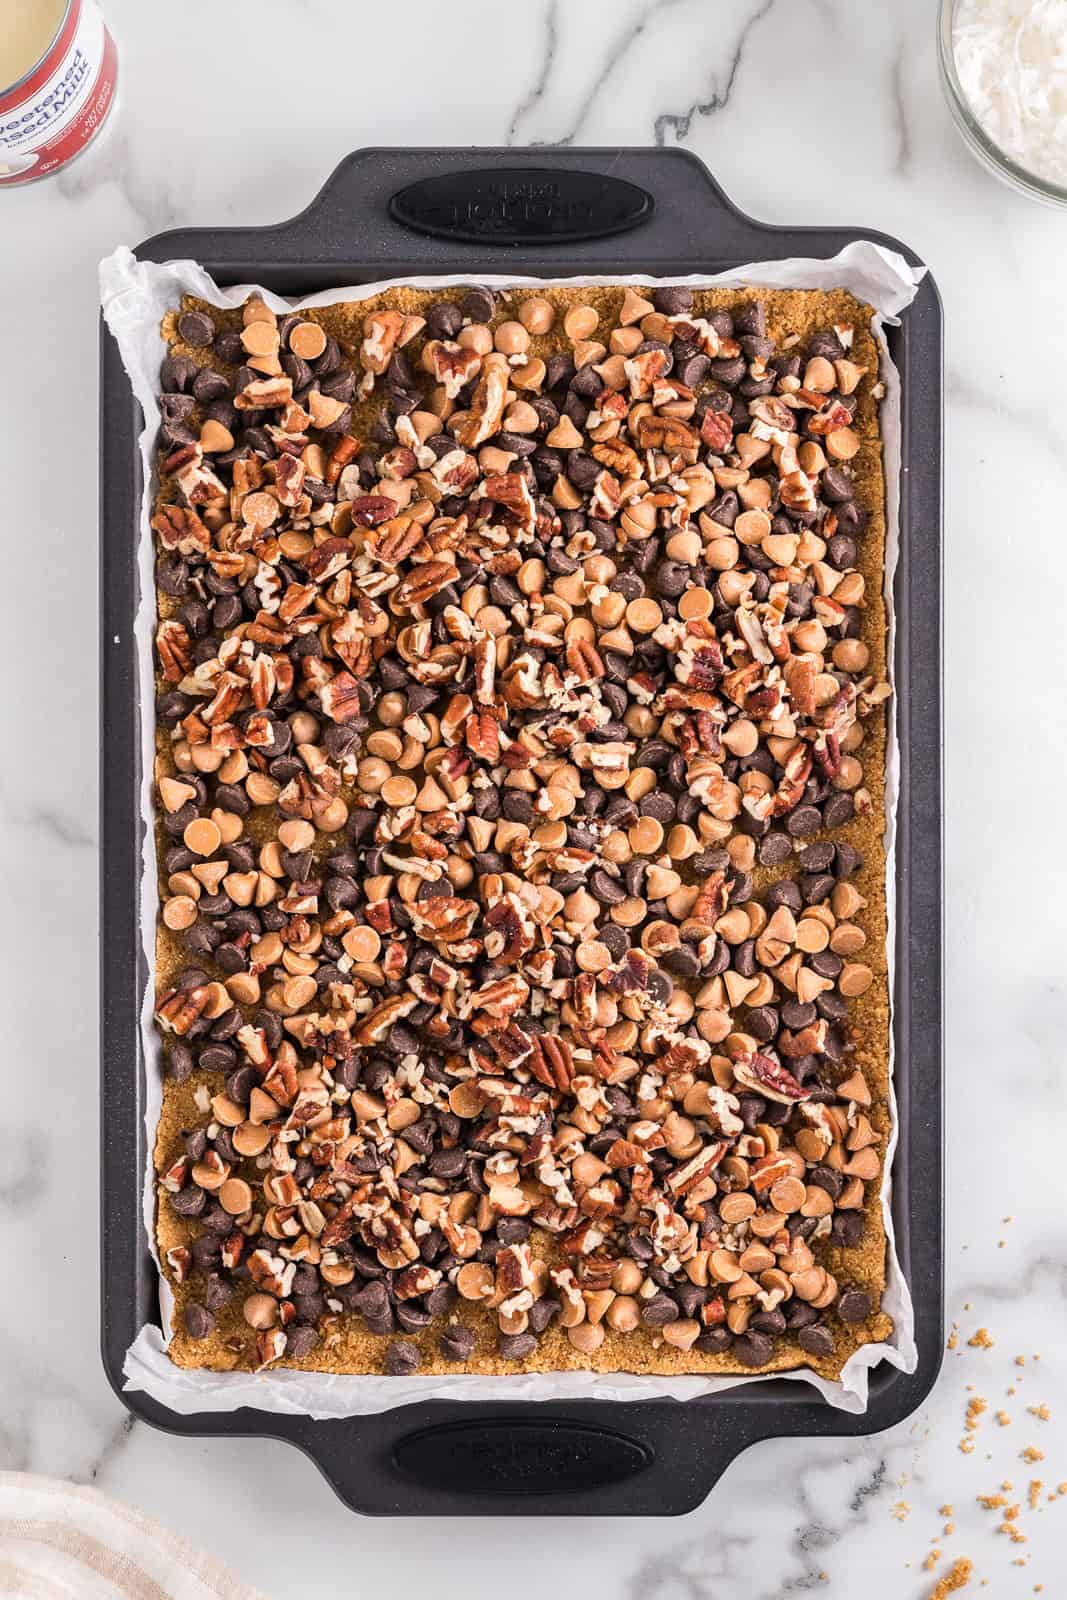 Butterscotch chips, chocolate chips, and pecans on top of a crust on a baking sheet lined with parchment paper.